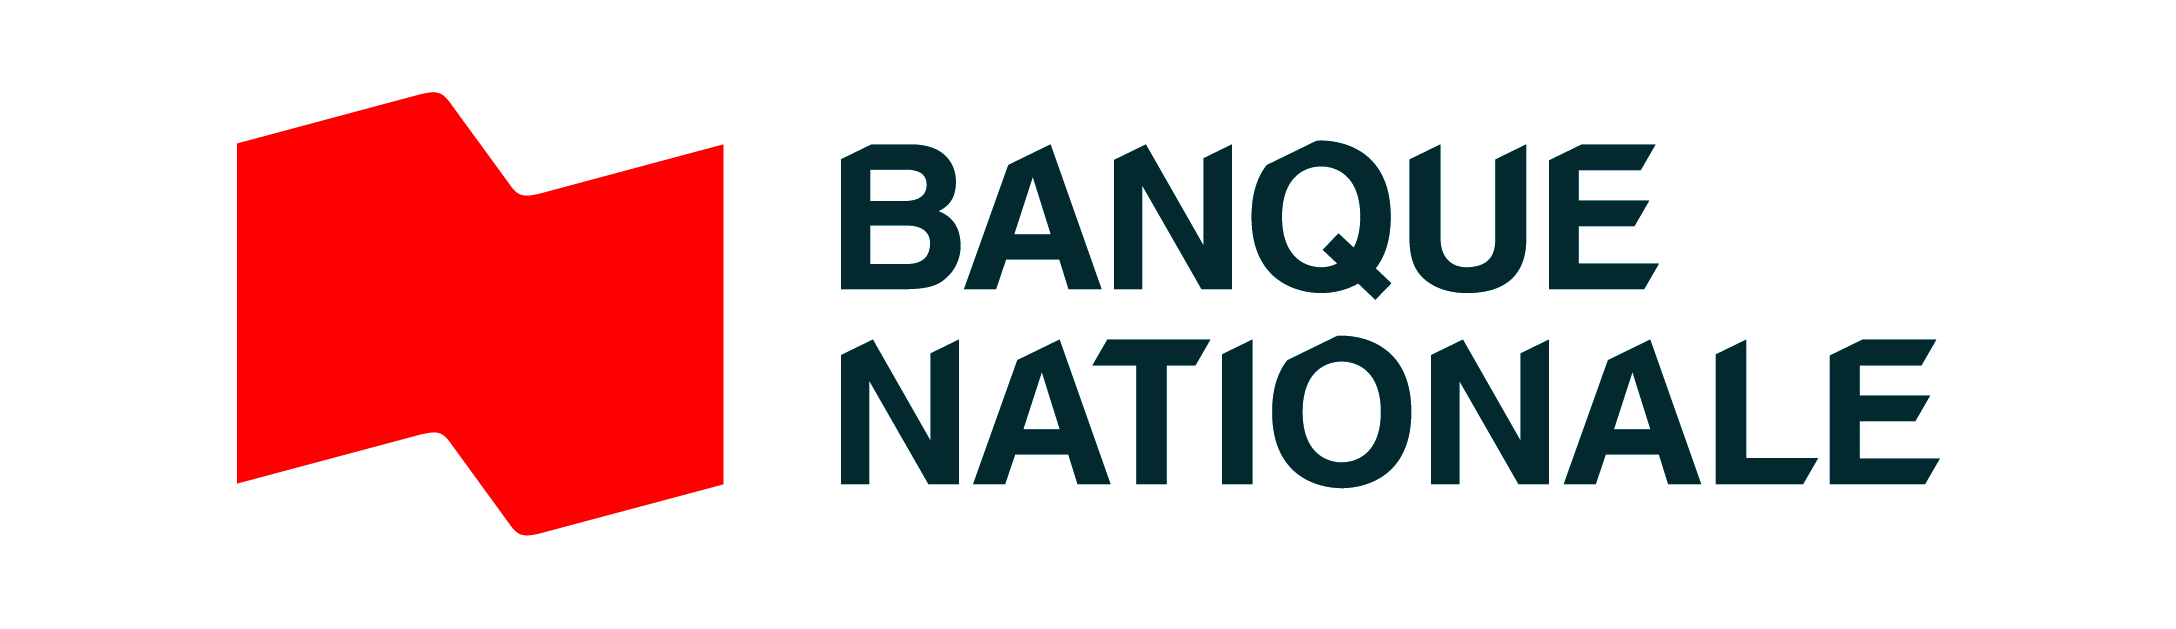 Banque Nationale - Synergie